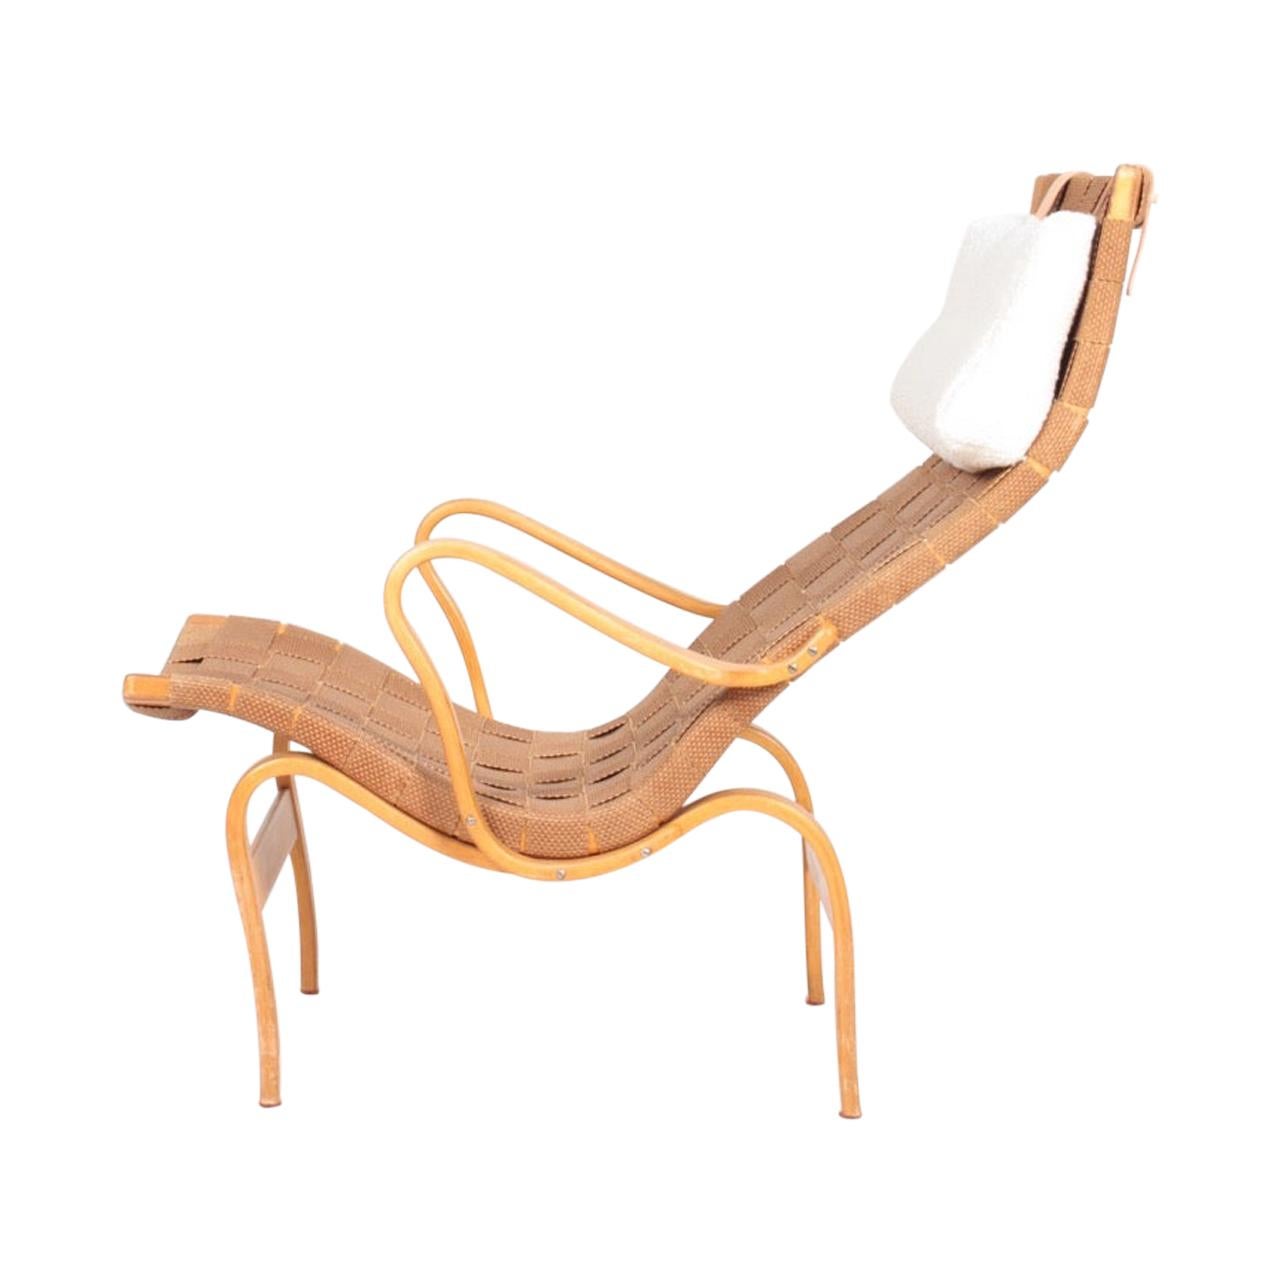 Midcentury Lounge Chair Model Pernilla 1 Designed by Bruno Mathsson